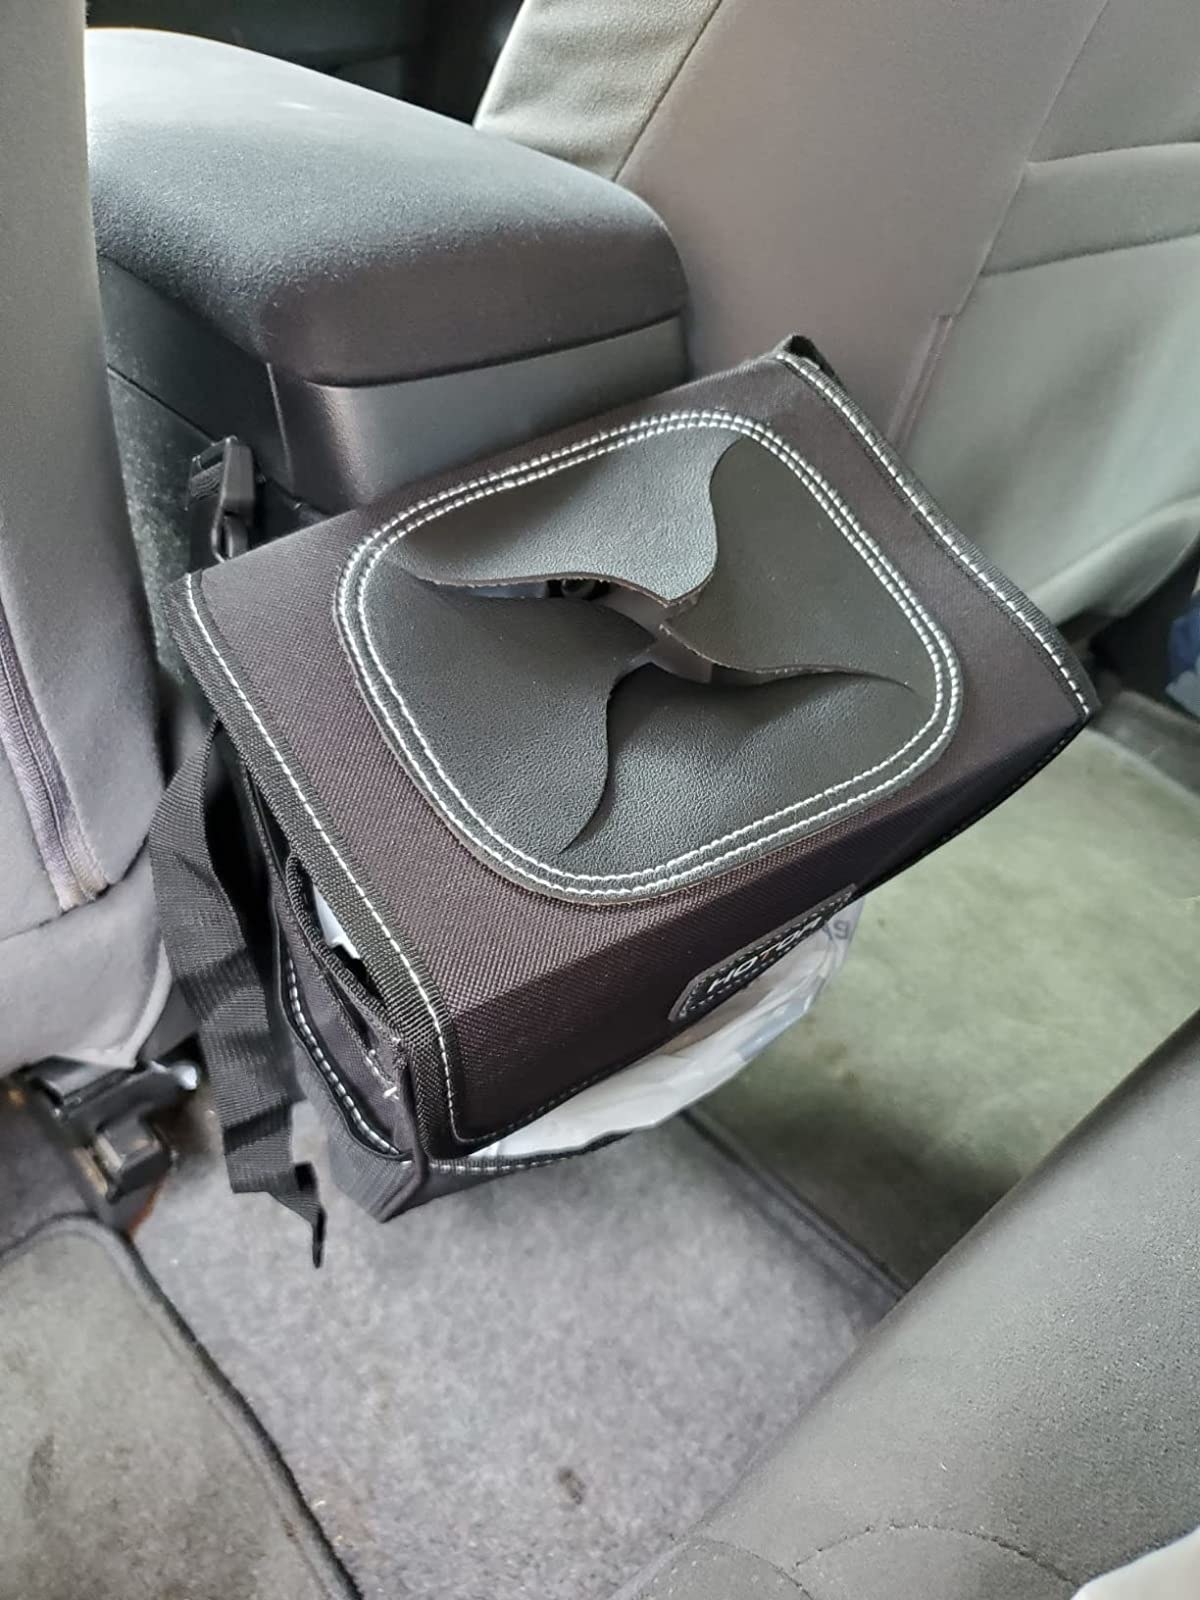 Reviewer image of travel trash can in their car